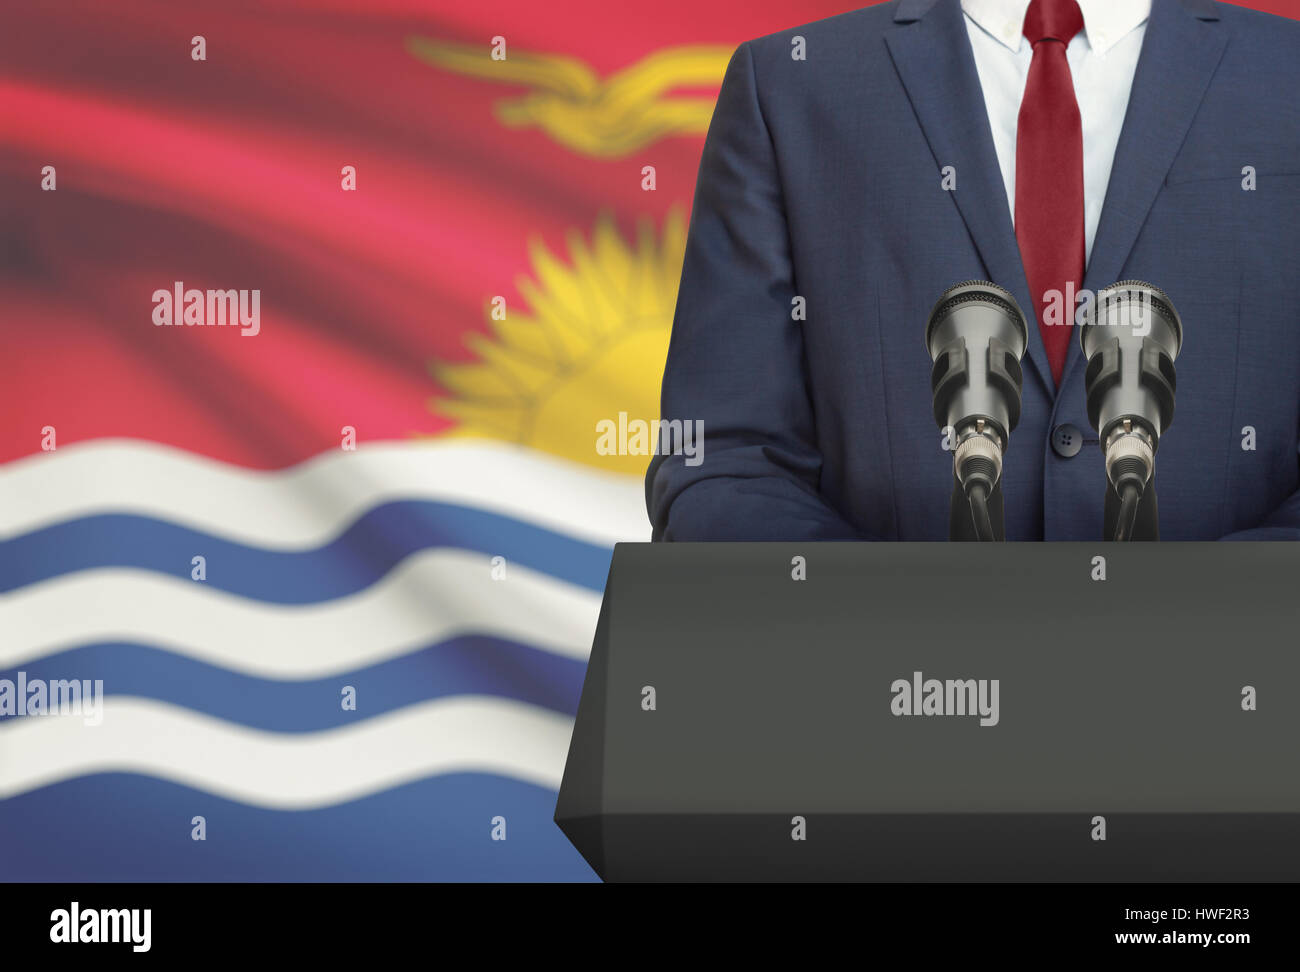 Businessman or politician making speech from behind the pulpit with national flag on background - Kiribati Stock Photo